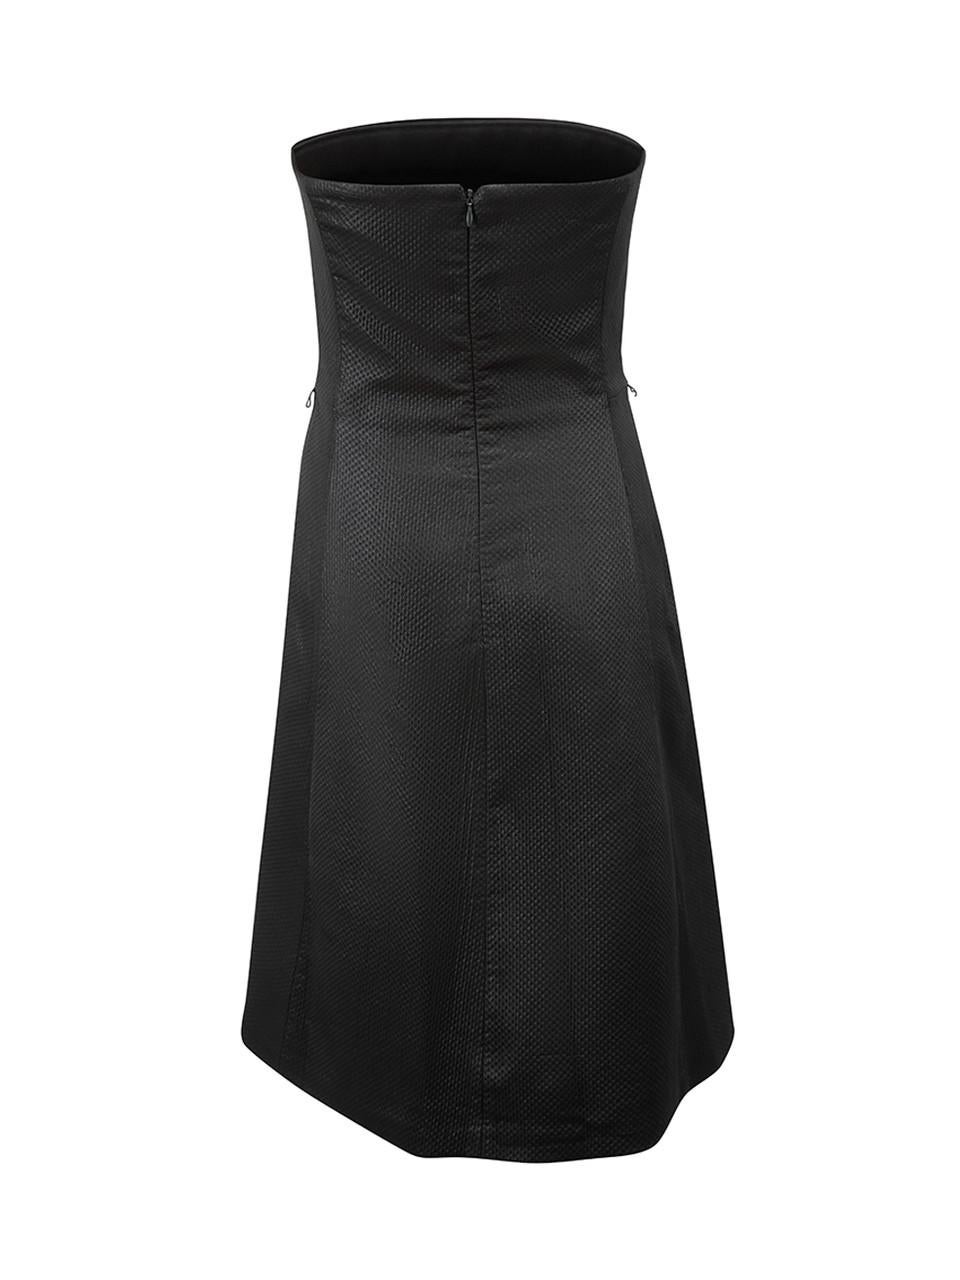 Max Mara Vintage Black Square Strapless Dress Size S In Excellent Condition For Sale In London, GB